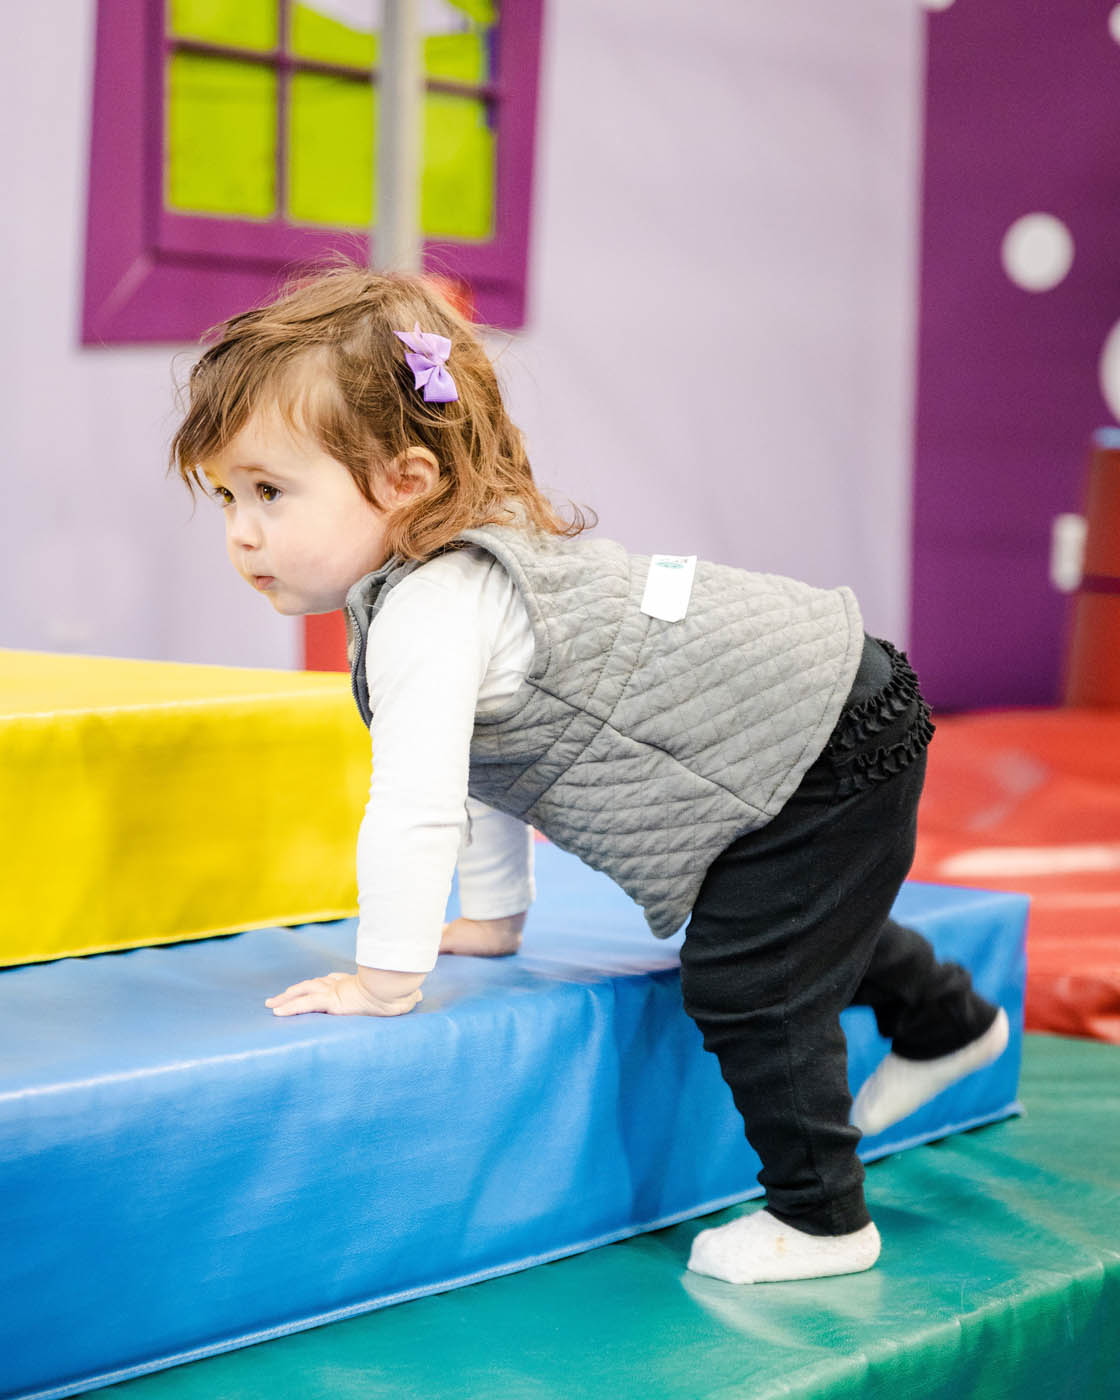 A little girl climbing on soft tumbling equipment for toddlers at Romp n' Roll in Wethersfield, CT.